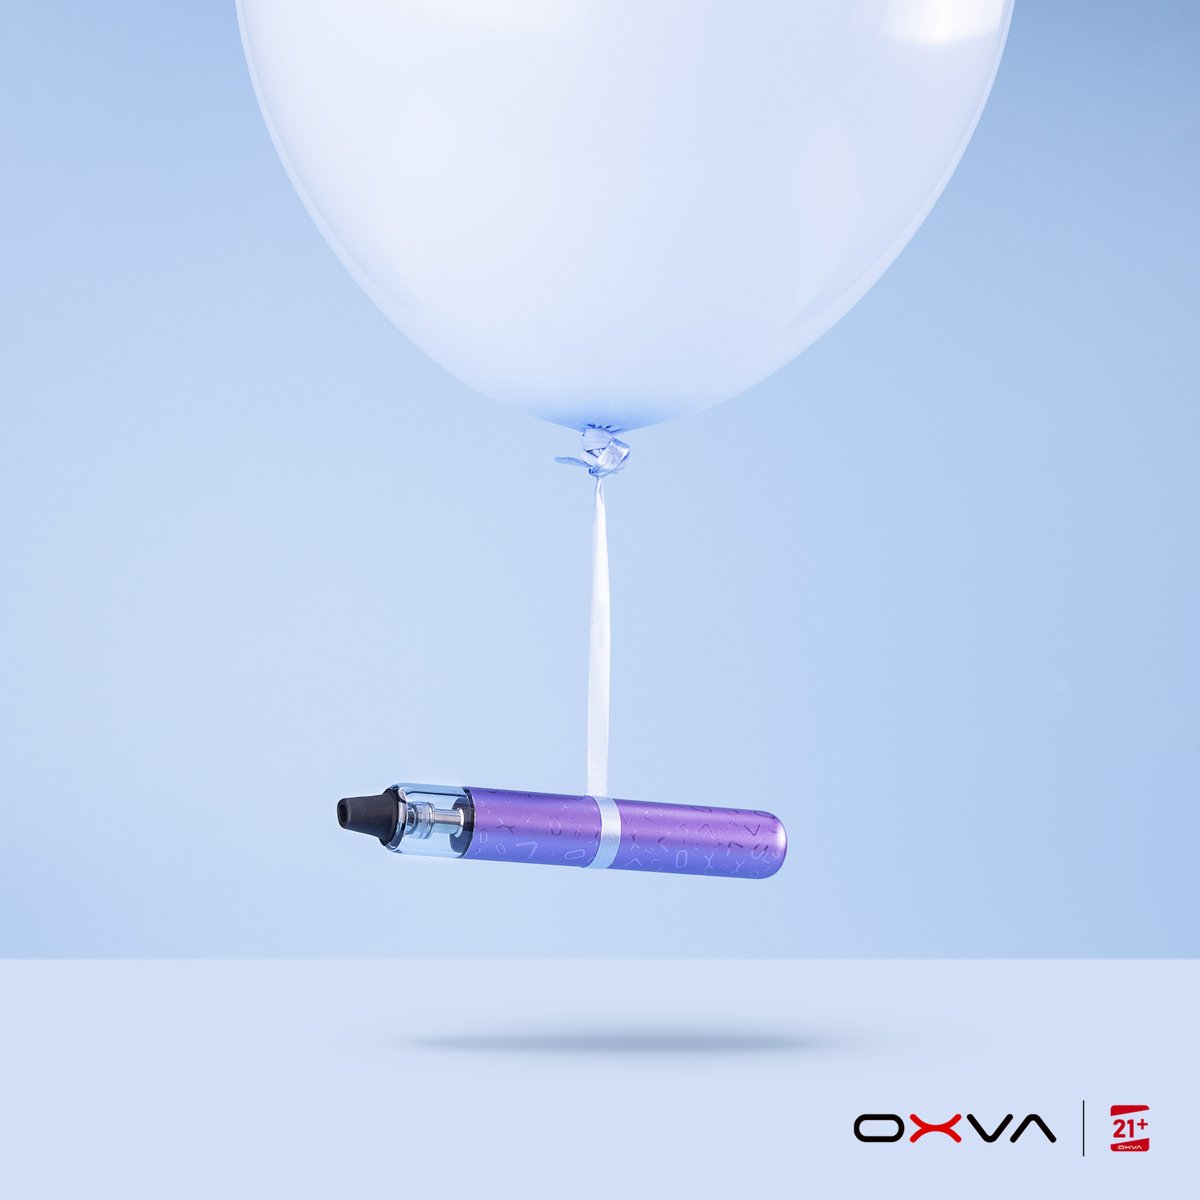 OXVA ARTIO Pod Kit

✨LIGHT AS A FEATHER ✨
Only 32g weight, with ultimate portability.

⚠ Warning: The device is used with e-liquid which contains addictive chemical nicotine. For Adult use only.

#sourcemore #sourcemoreofficial #OXVA #ARTIOkit
#vapetricks #instavape #vapefam